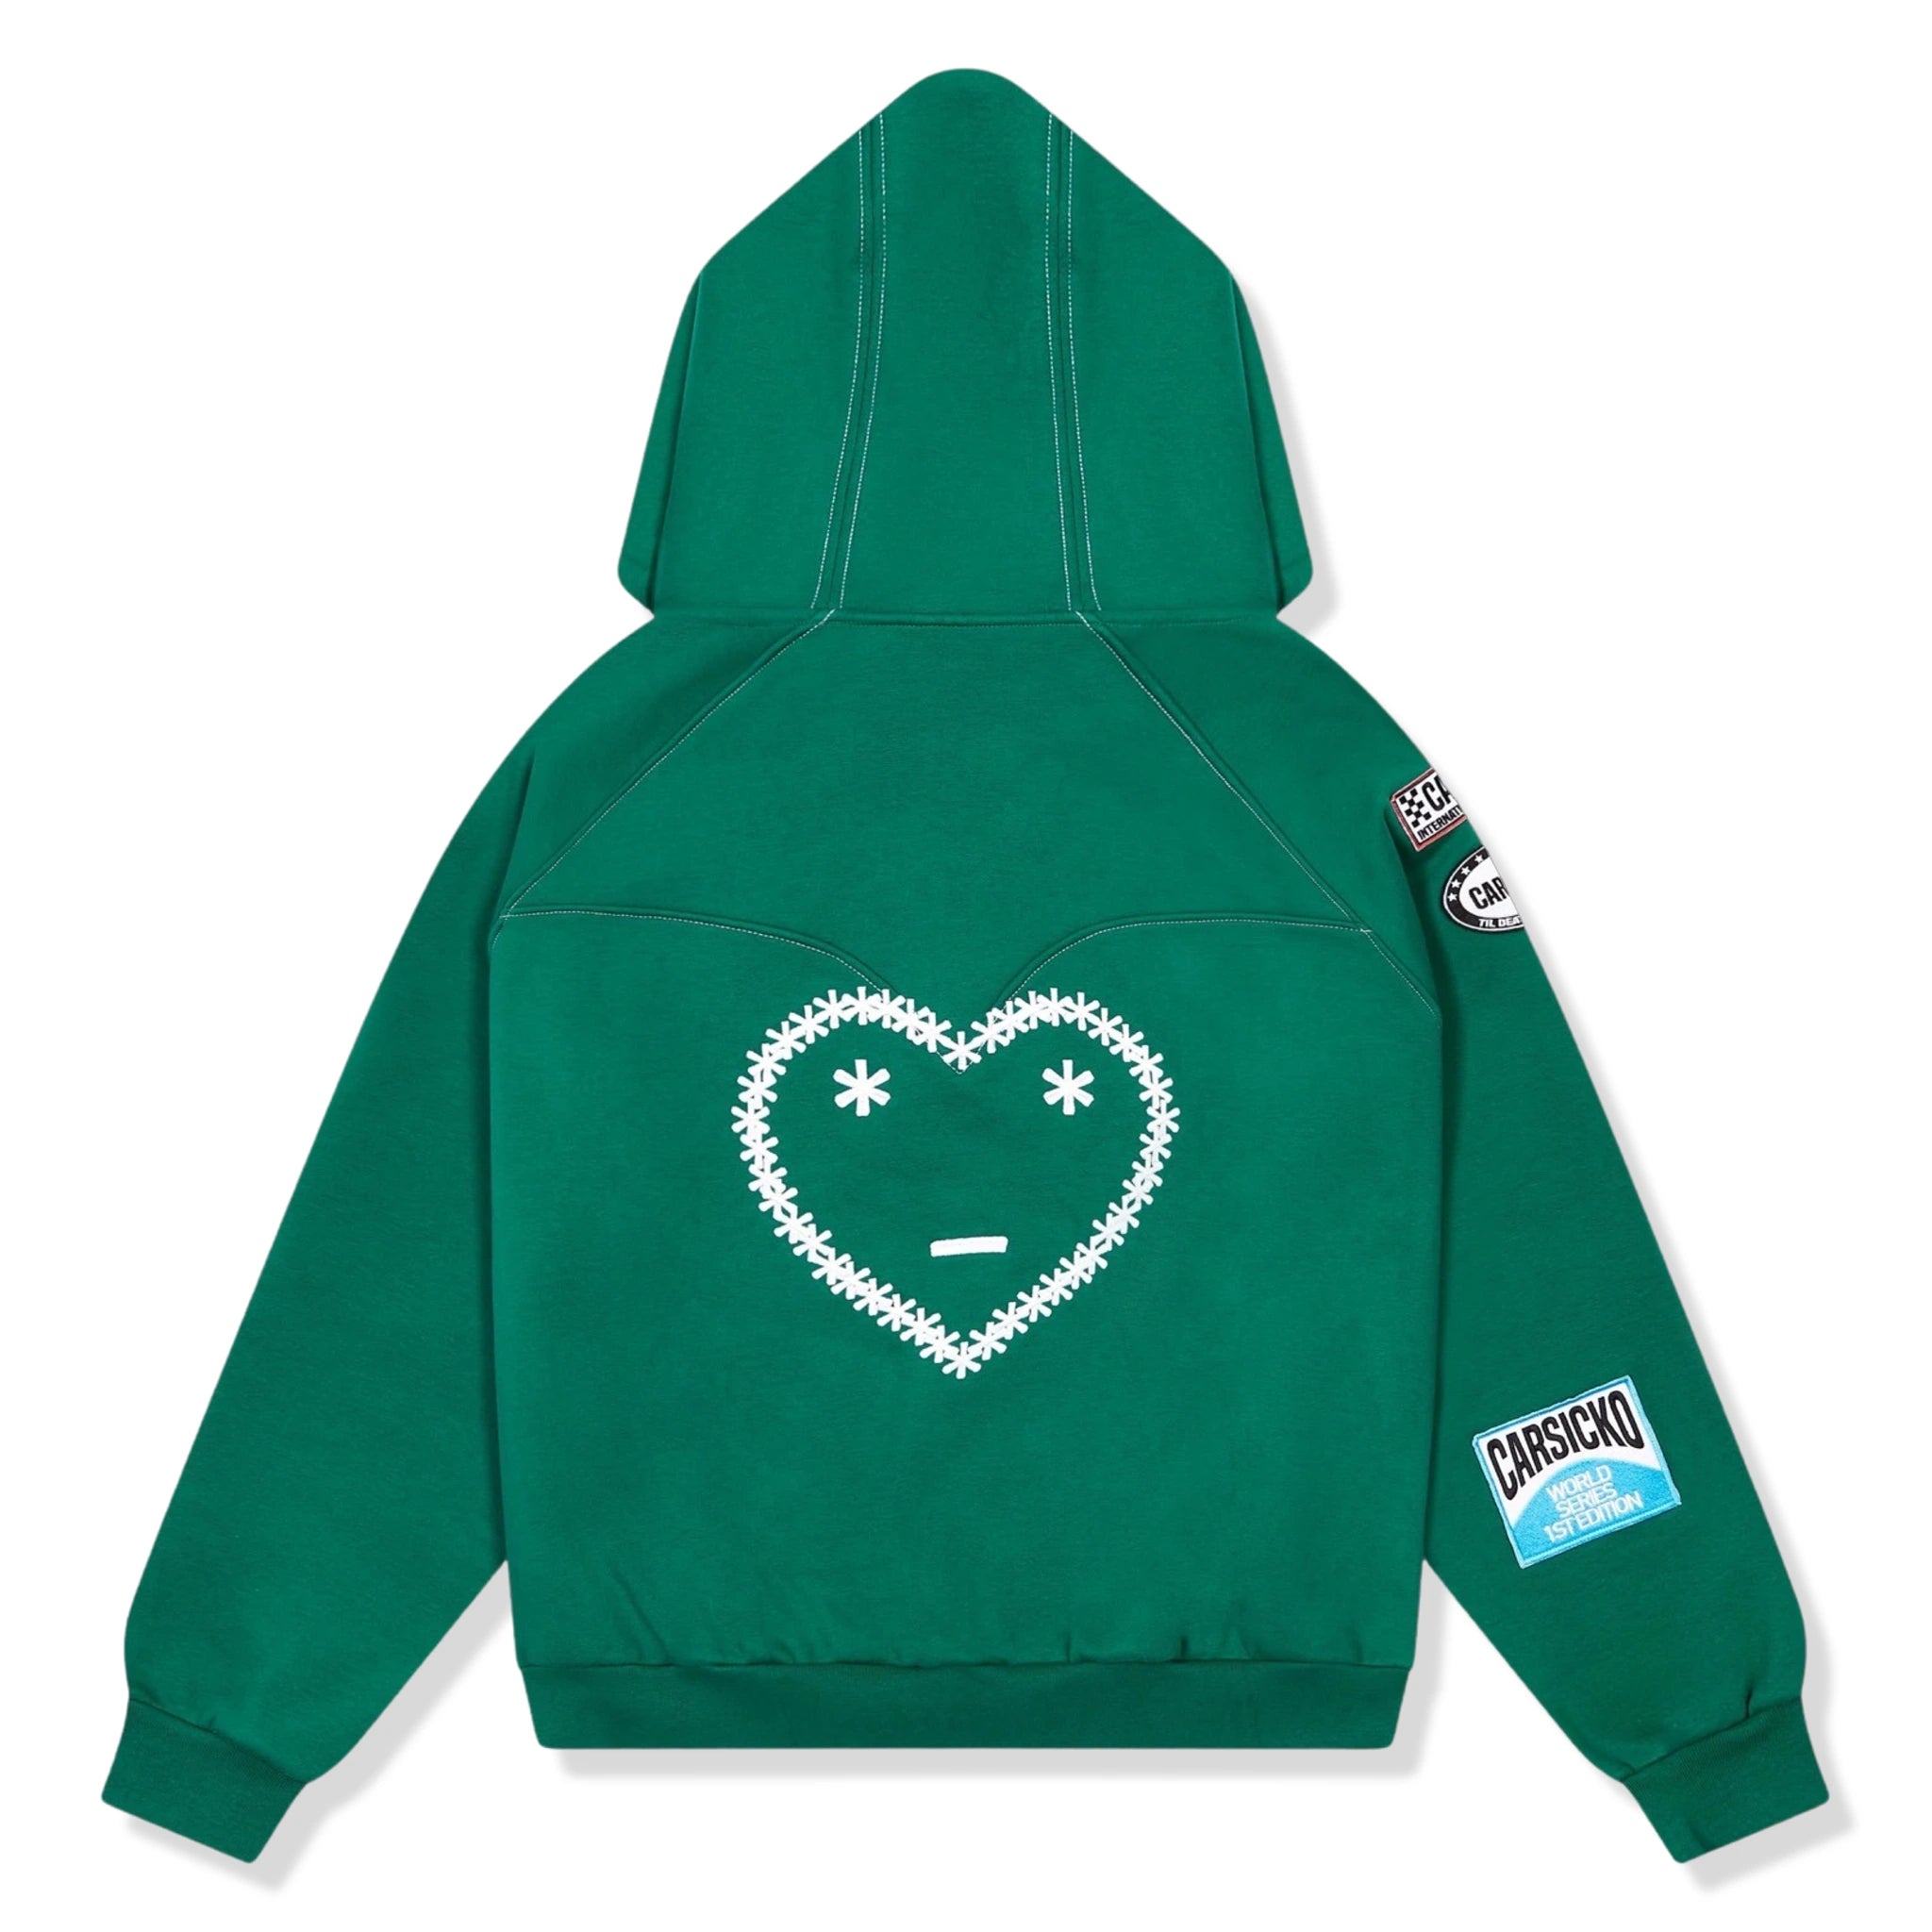 Back view of Carsicko Racing Club Green Hoodie